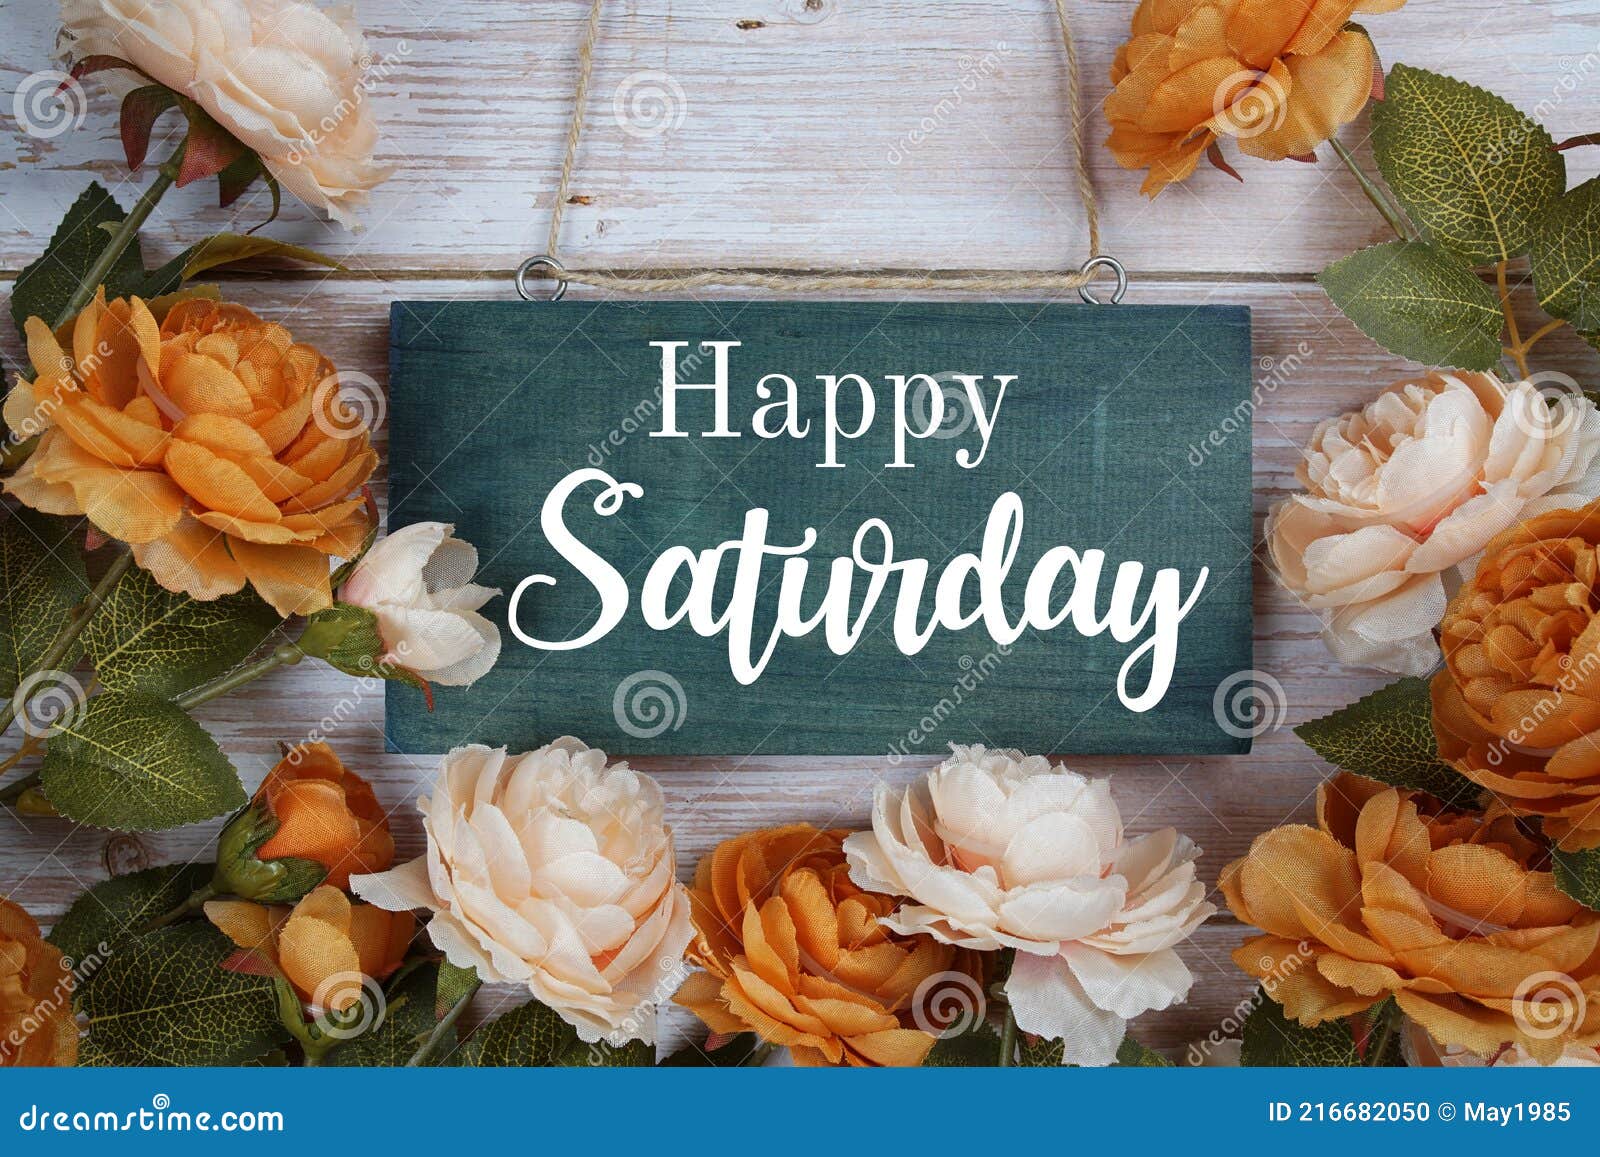 Happy Saturday Typography Text with Flower Decoration on Wooden ...